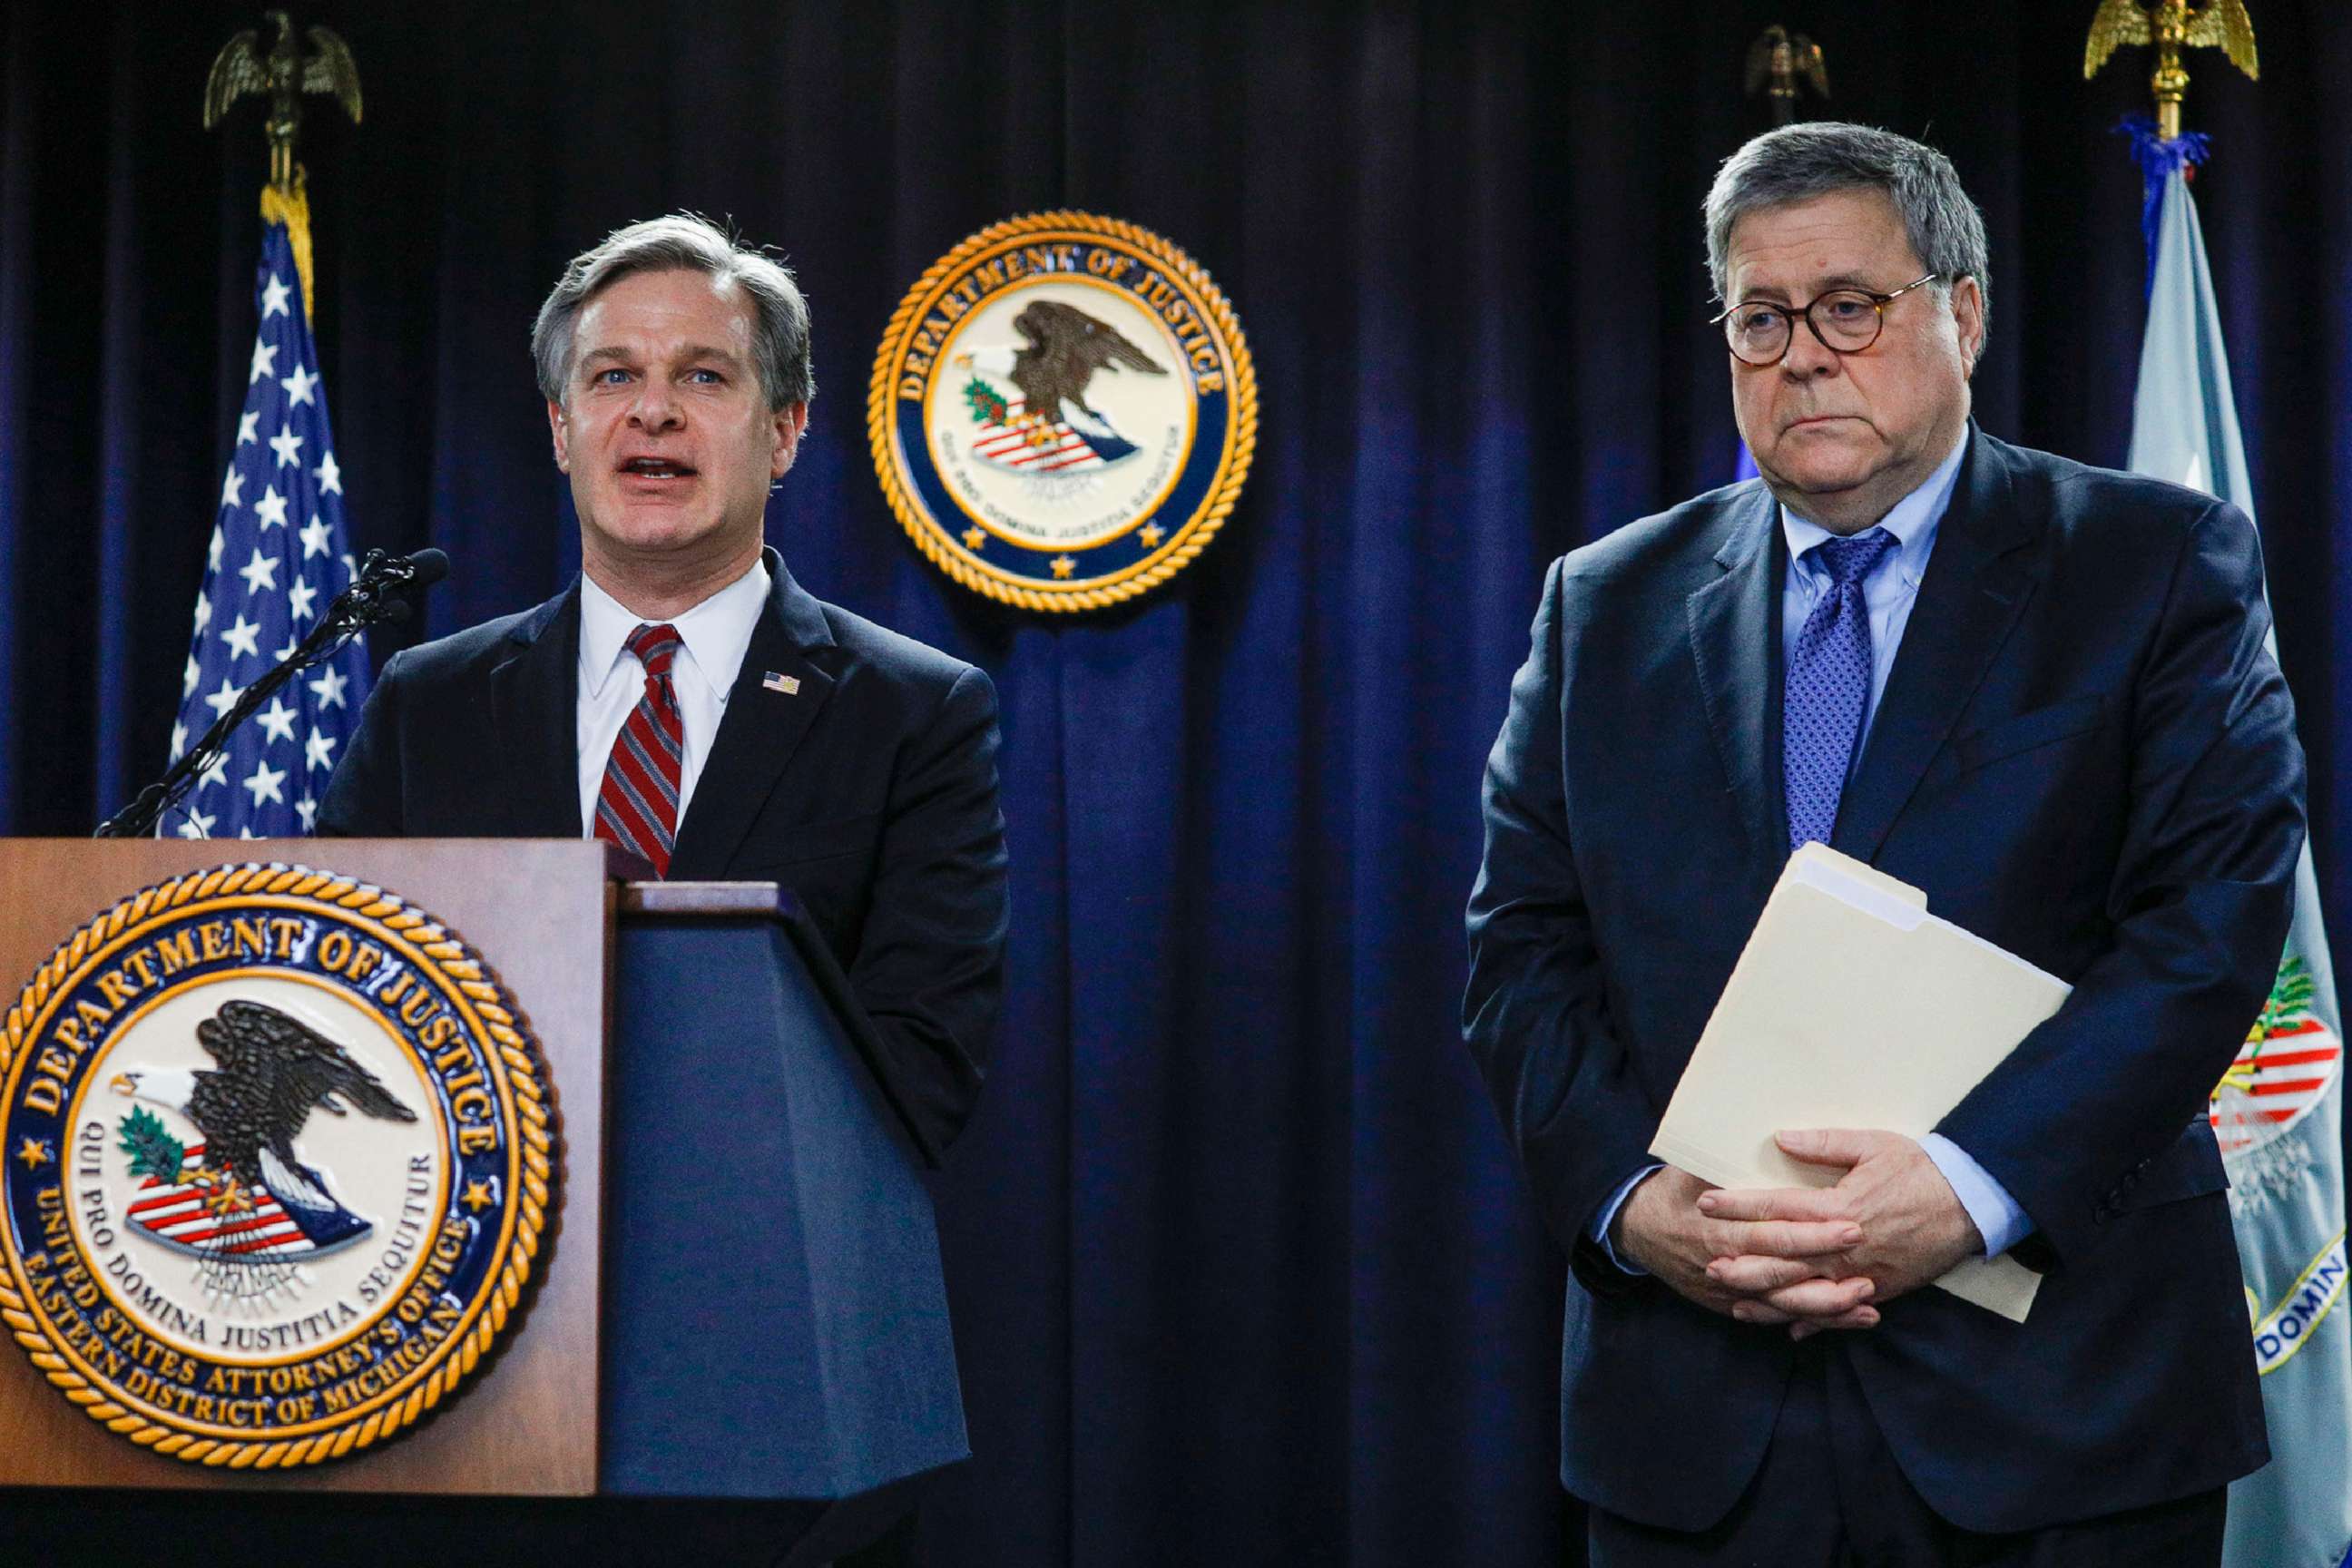 PHOTO: U.S. Attorney General William Barr, right, listens while FBI Director Christopher Wray, left, speaks at an announcement of a new Crime Reduction Initiative designed to reduce crime in Detroit, Dec. 18, 2019.